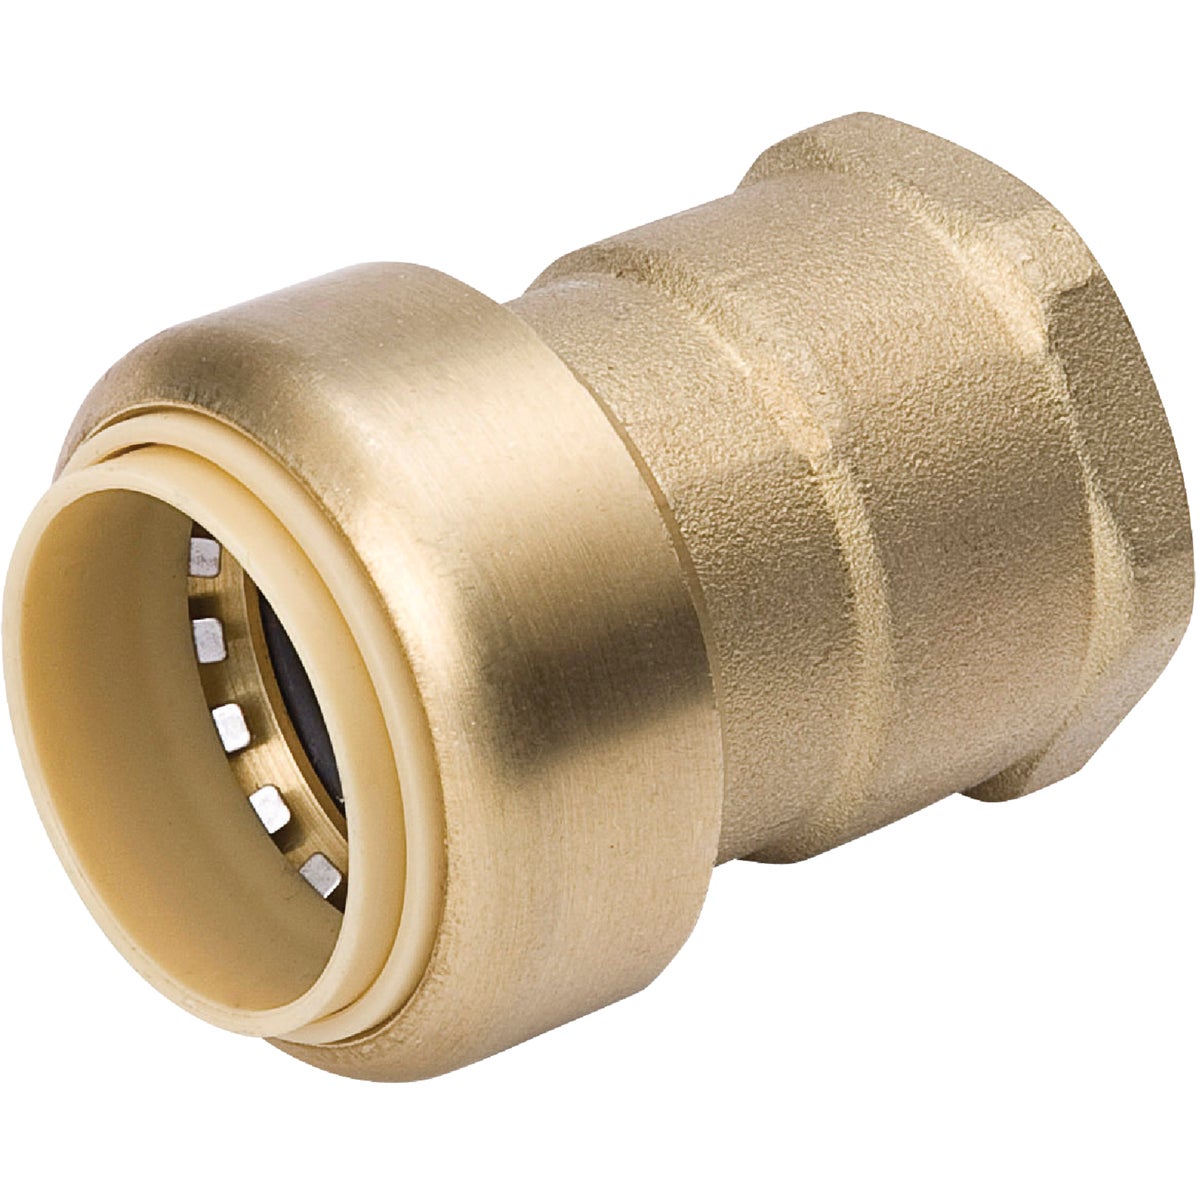 ProLine 1 In. x 1 In. FPT Brass Push Fit Adapter